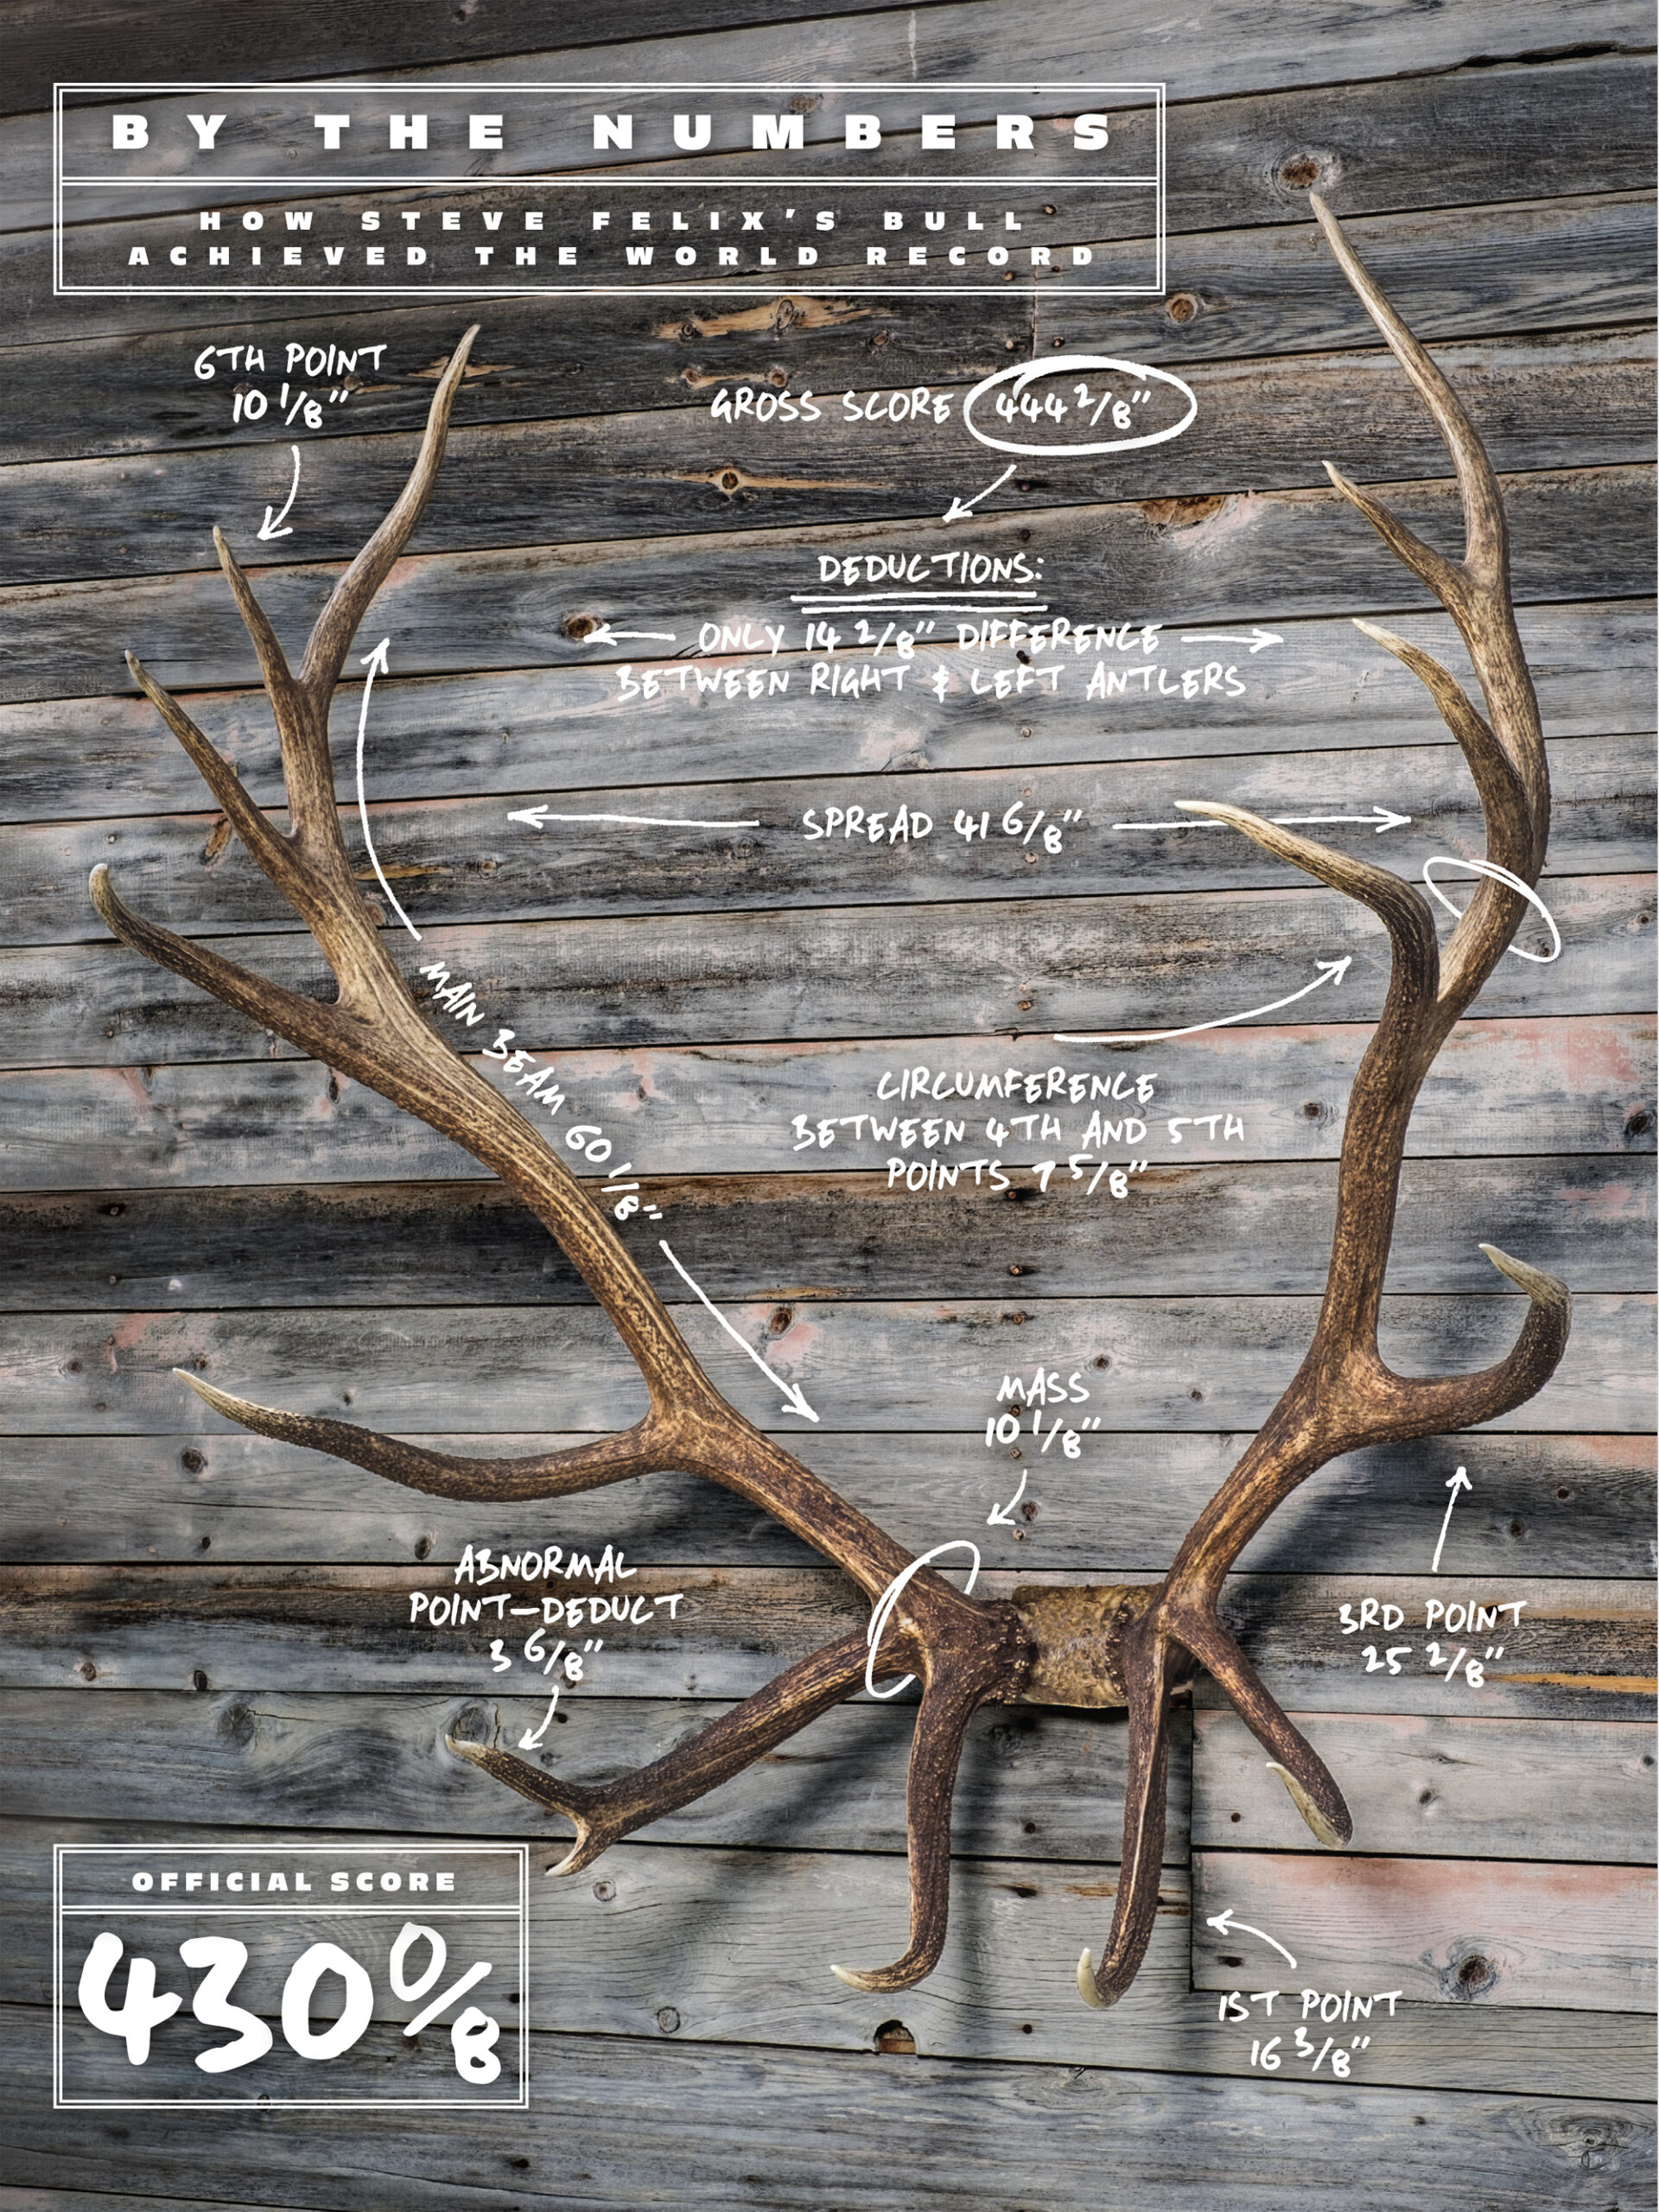 annotated antlers scoring the felix bull